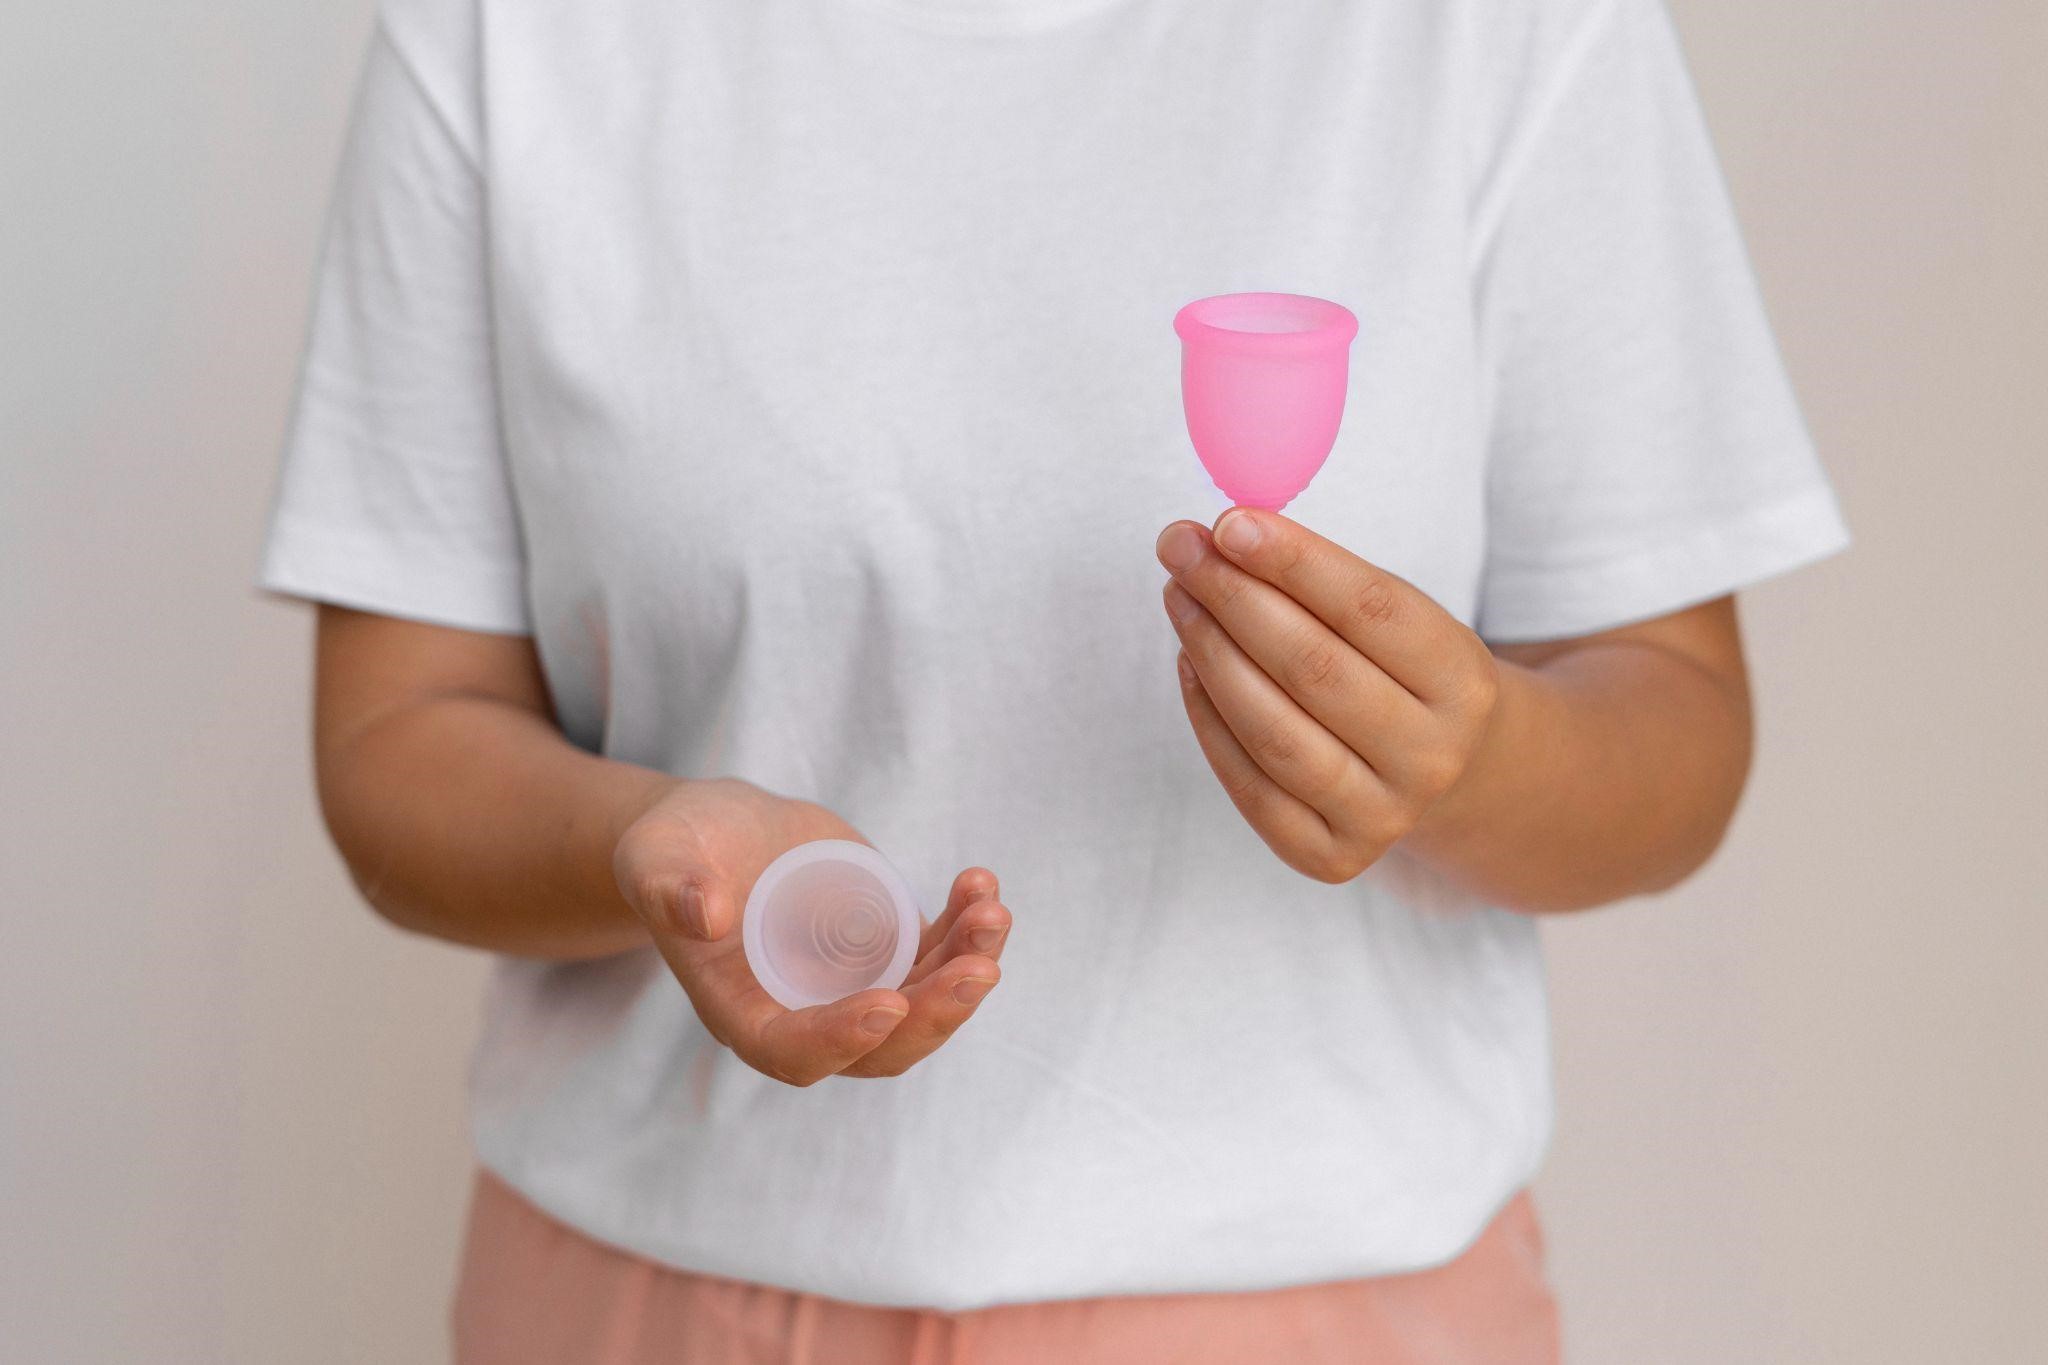 Never used one of these, where should I start? : r/menstrualcups